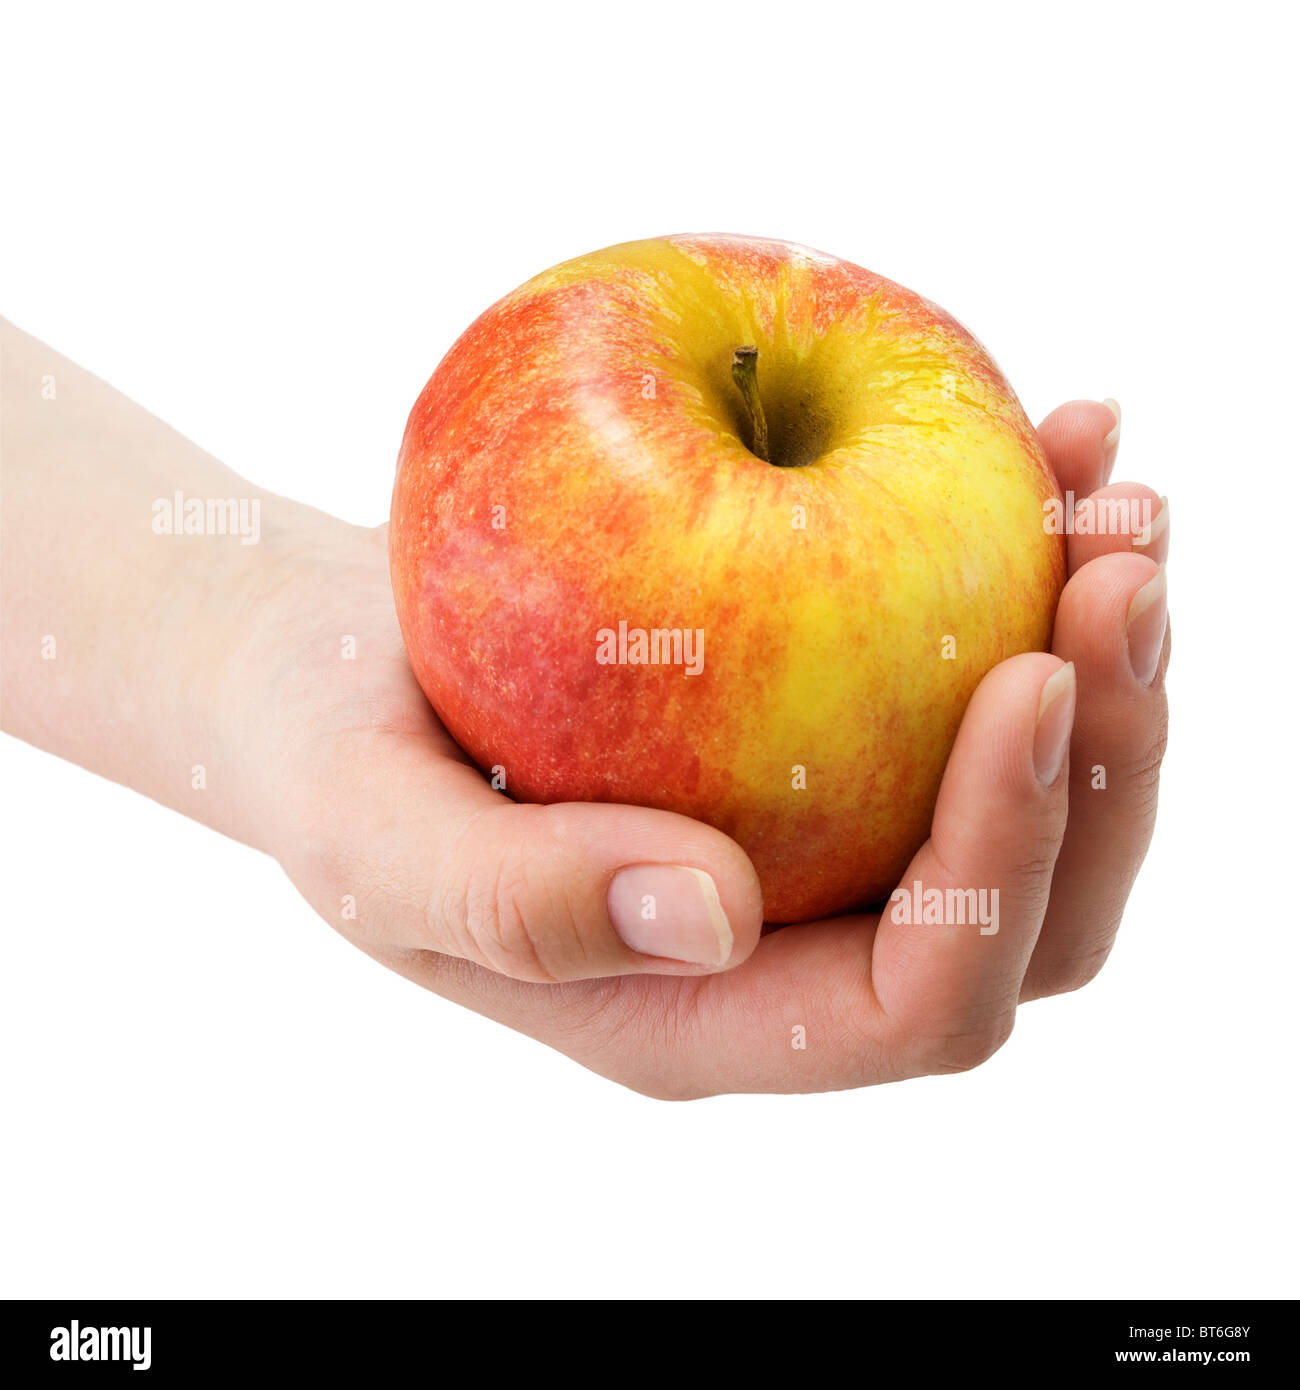 Hand holding red with yellow sidewise an apple on a white background Stock Photo